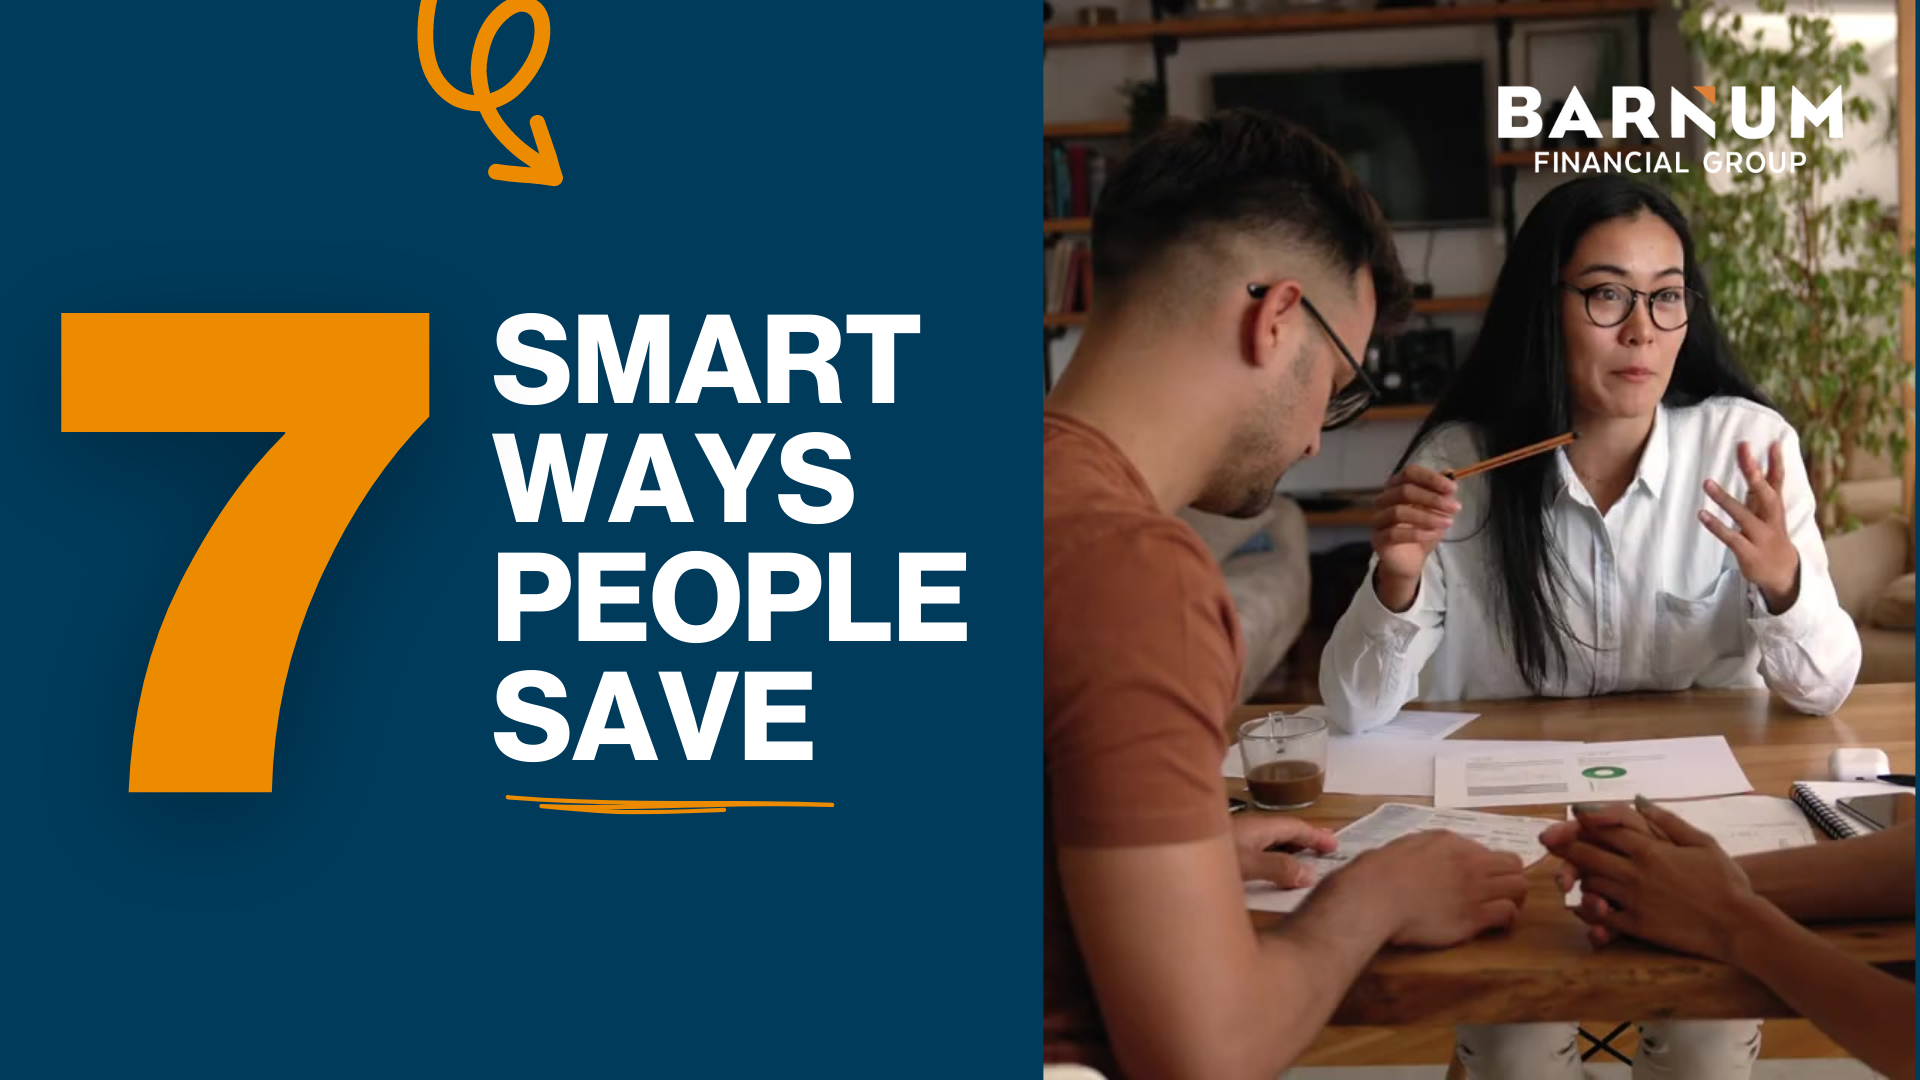 Smart Ways to Save: Get Things Done Right